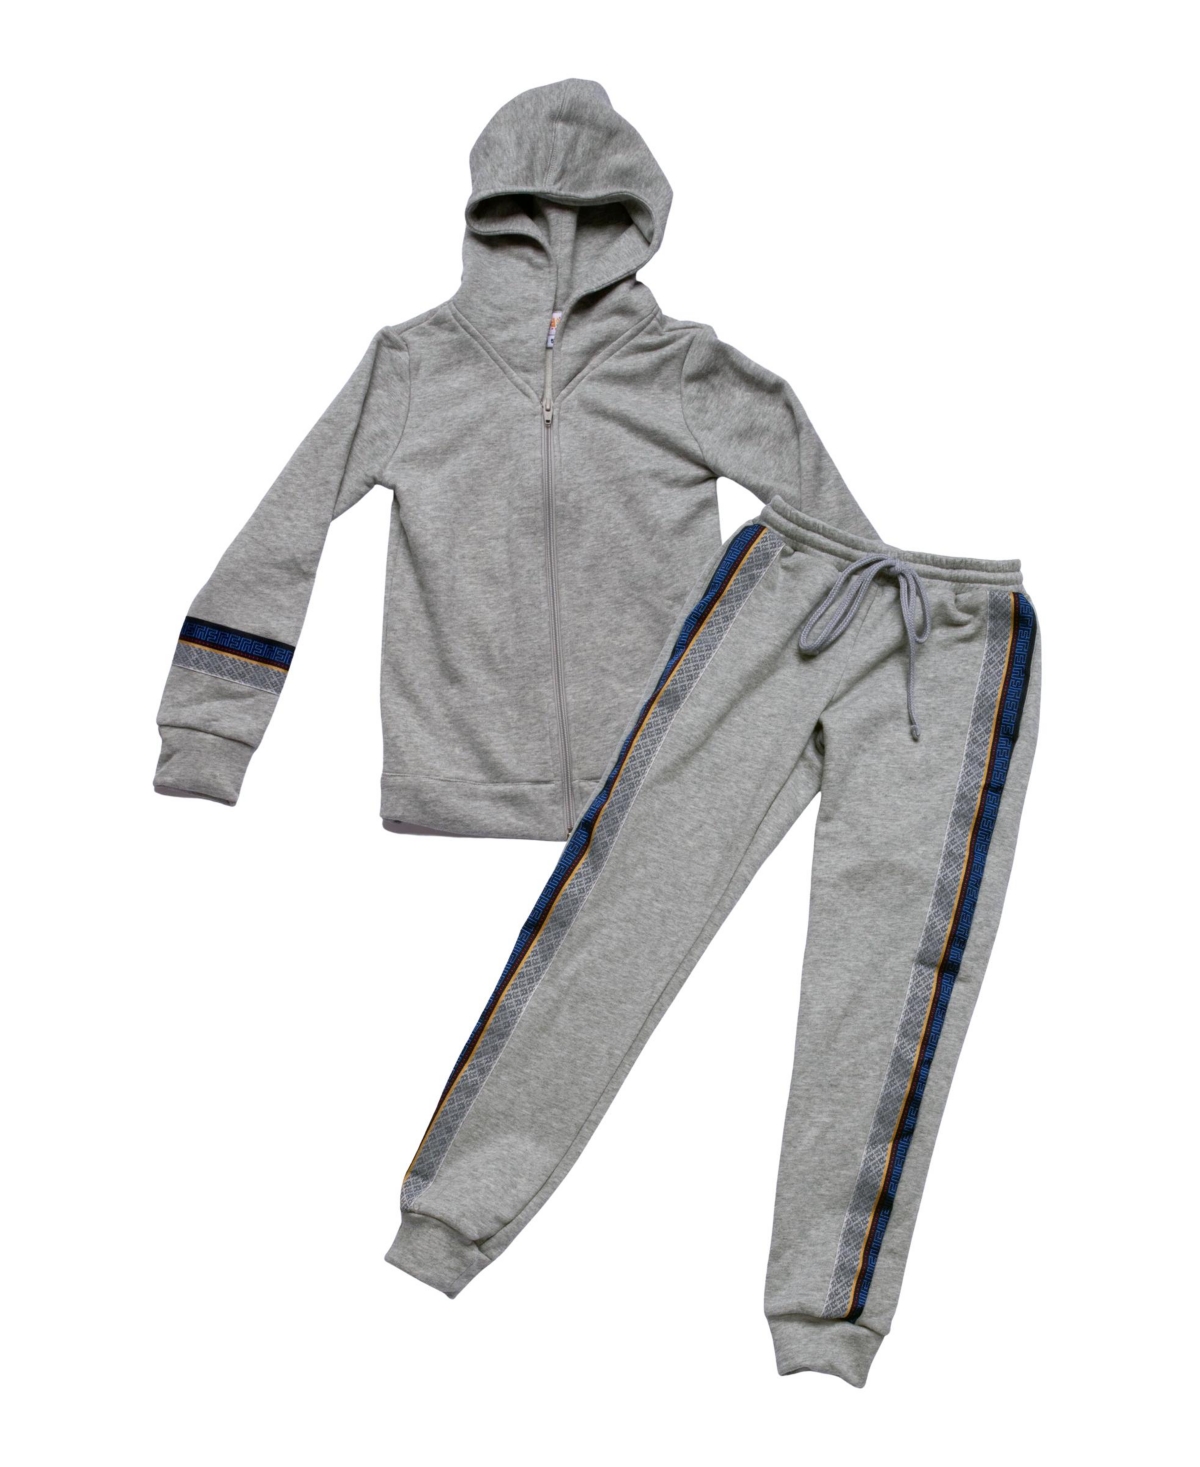 Mixed Up Clothing Big Boys Zip Front Hoodie And Joggers Set In Gray